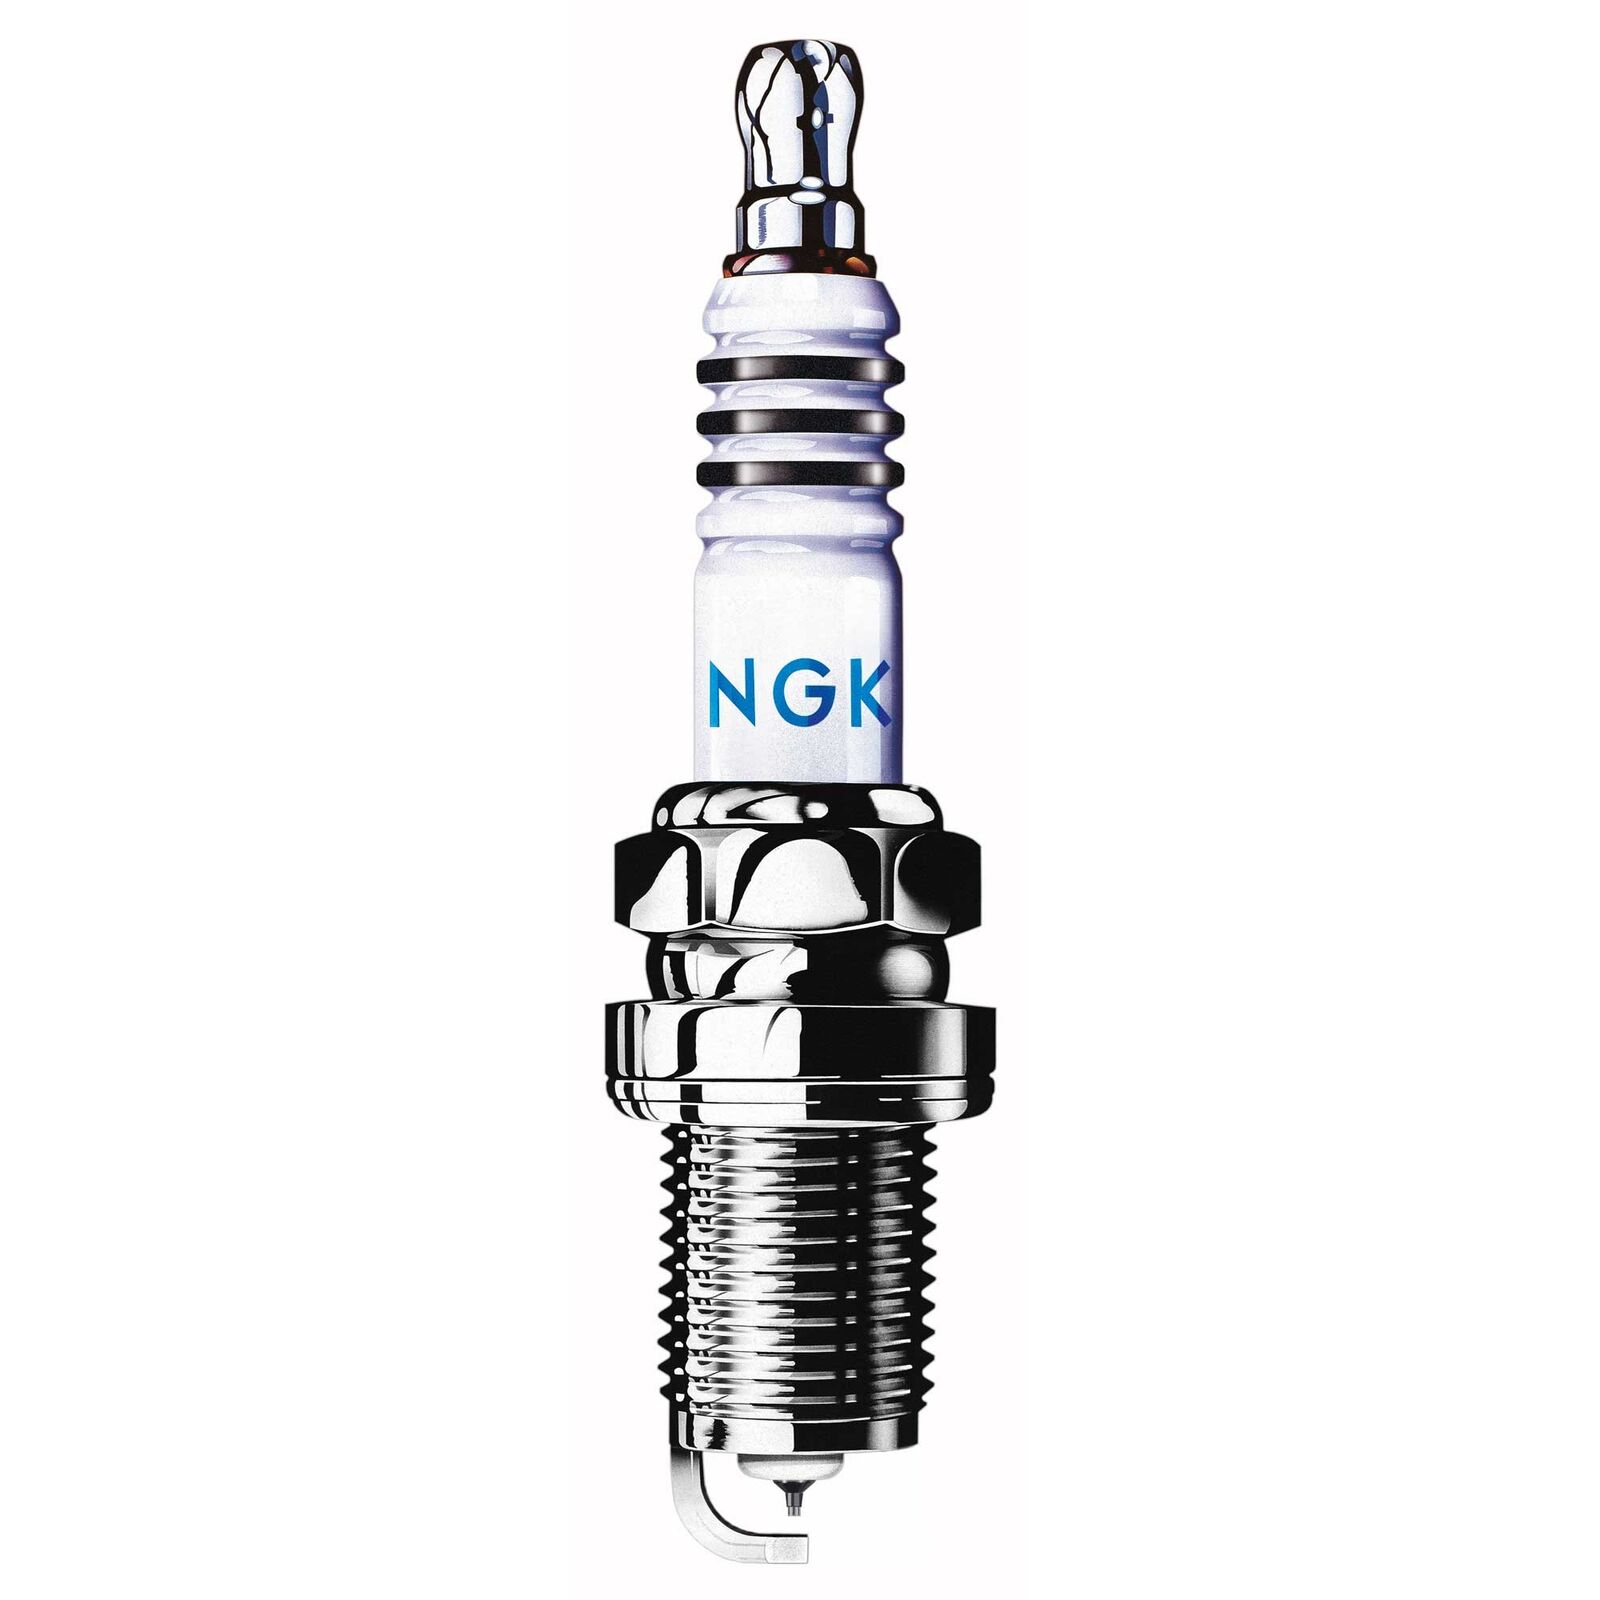 NGK Copper Core Motorbike Spark Plugs Suitable For Kawasaki ZRX1200S B4 2005